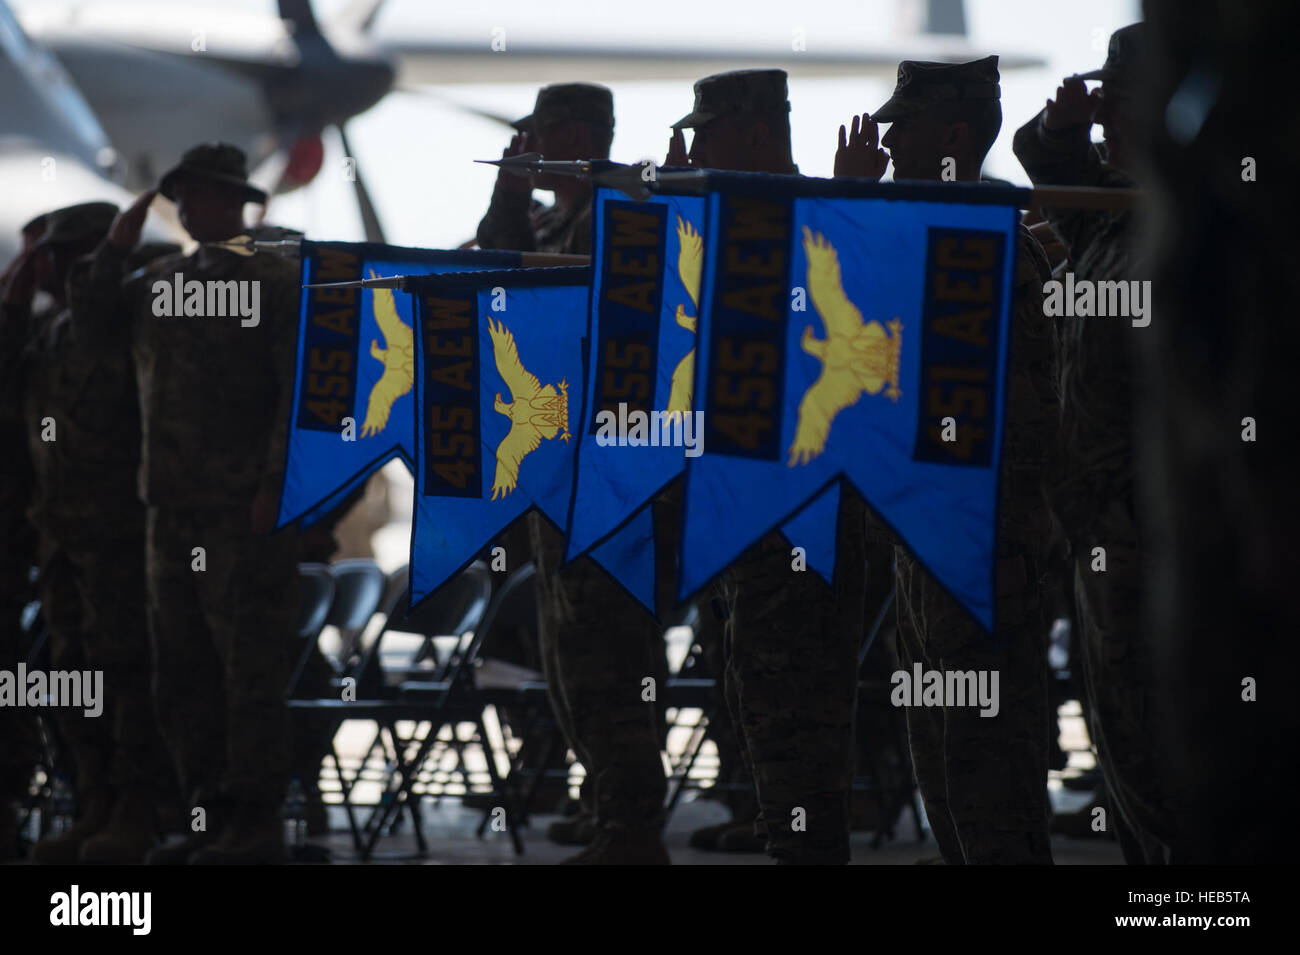 U.S. Airmen assigned to the 455th Air Expeditionary Wing lower the group guidons during the national anthem at the 455th AEW change of command ceremony at Bagram Air Field, Afghanistan, July 1, 2015. During the ceremony Kelly relinquished command of the 455th AEW to Brig. Gen. Dave Julazadeh.   Tech. Sgt. Joseph Swafford Stock Photo